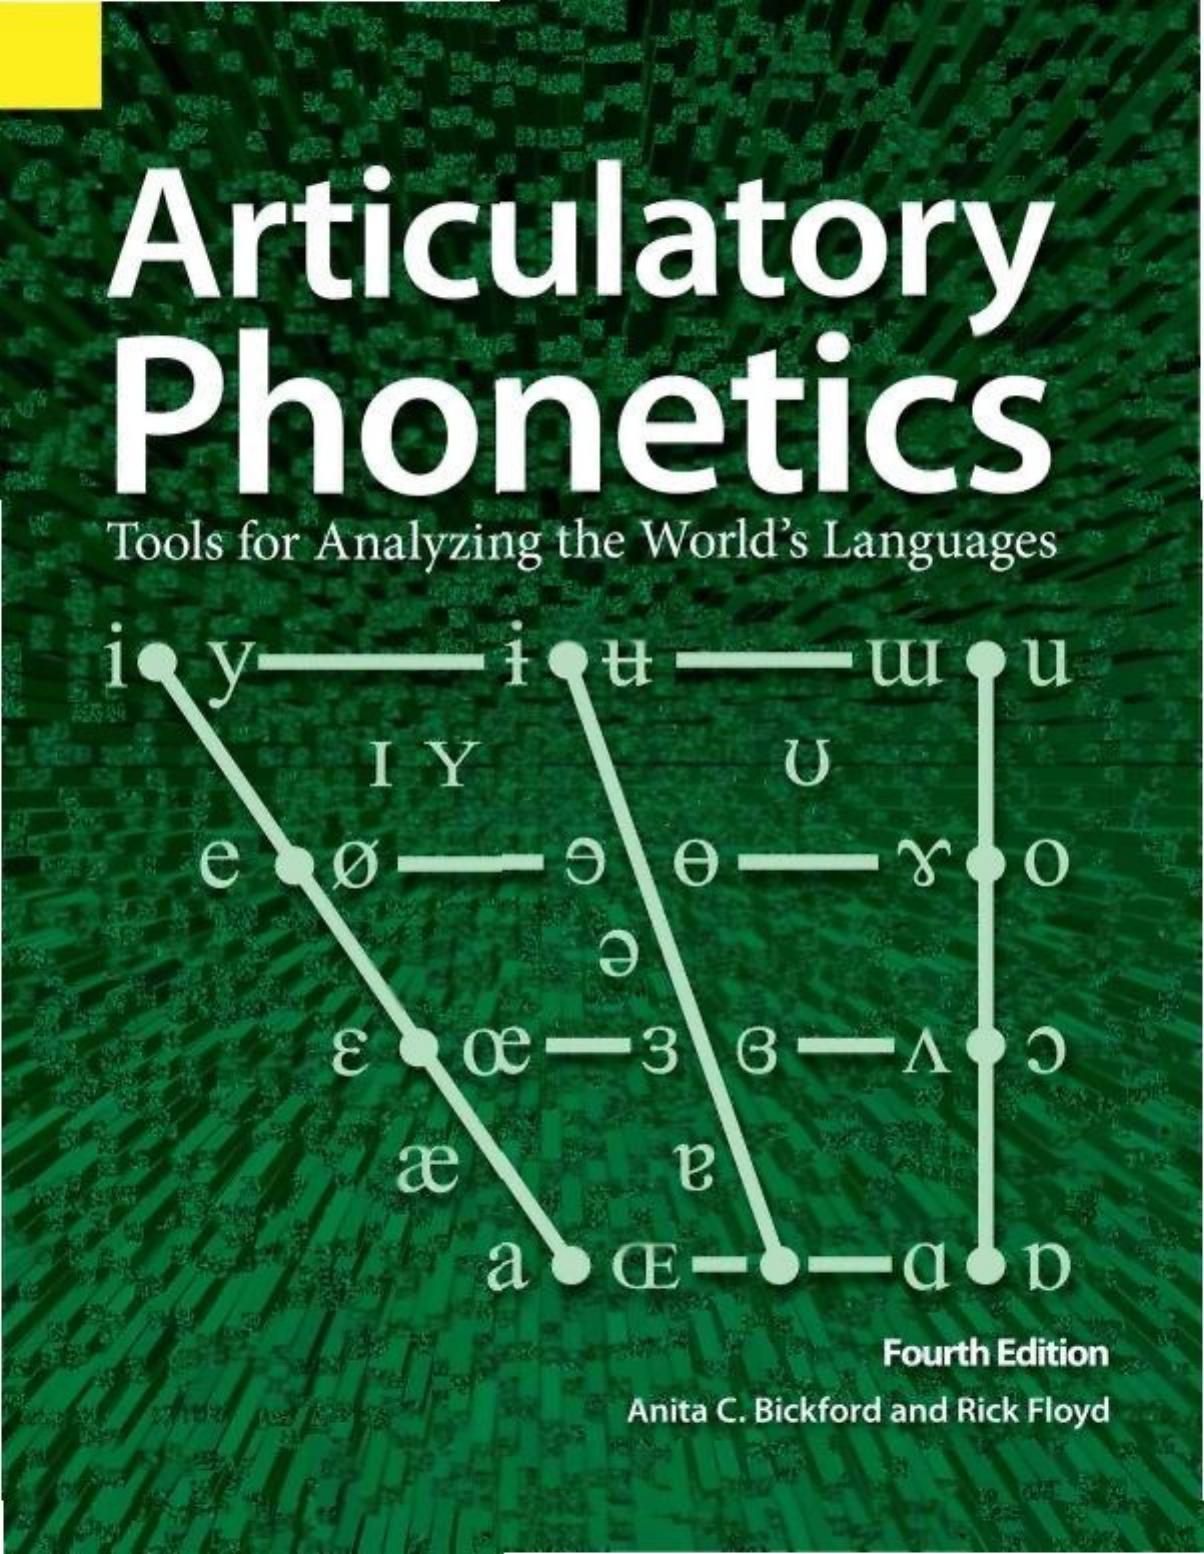 Articulatory Phonetics: Tools for Analyzing the World's Languages